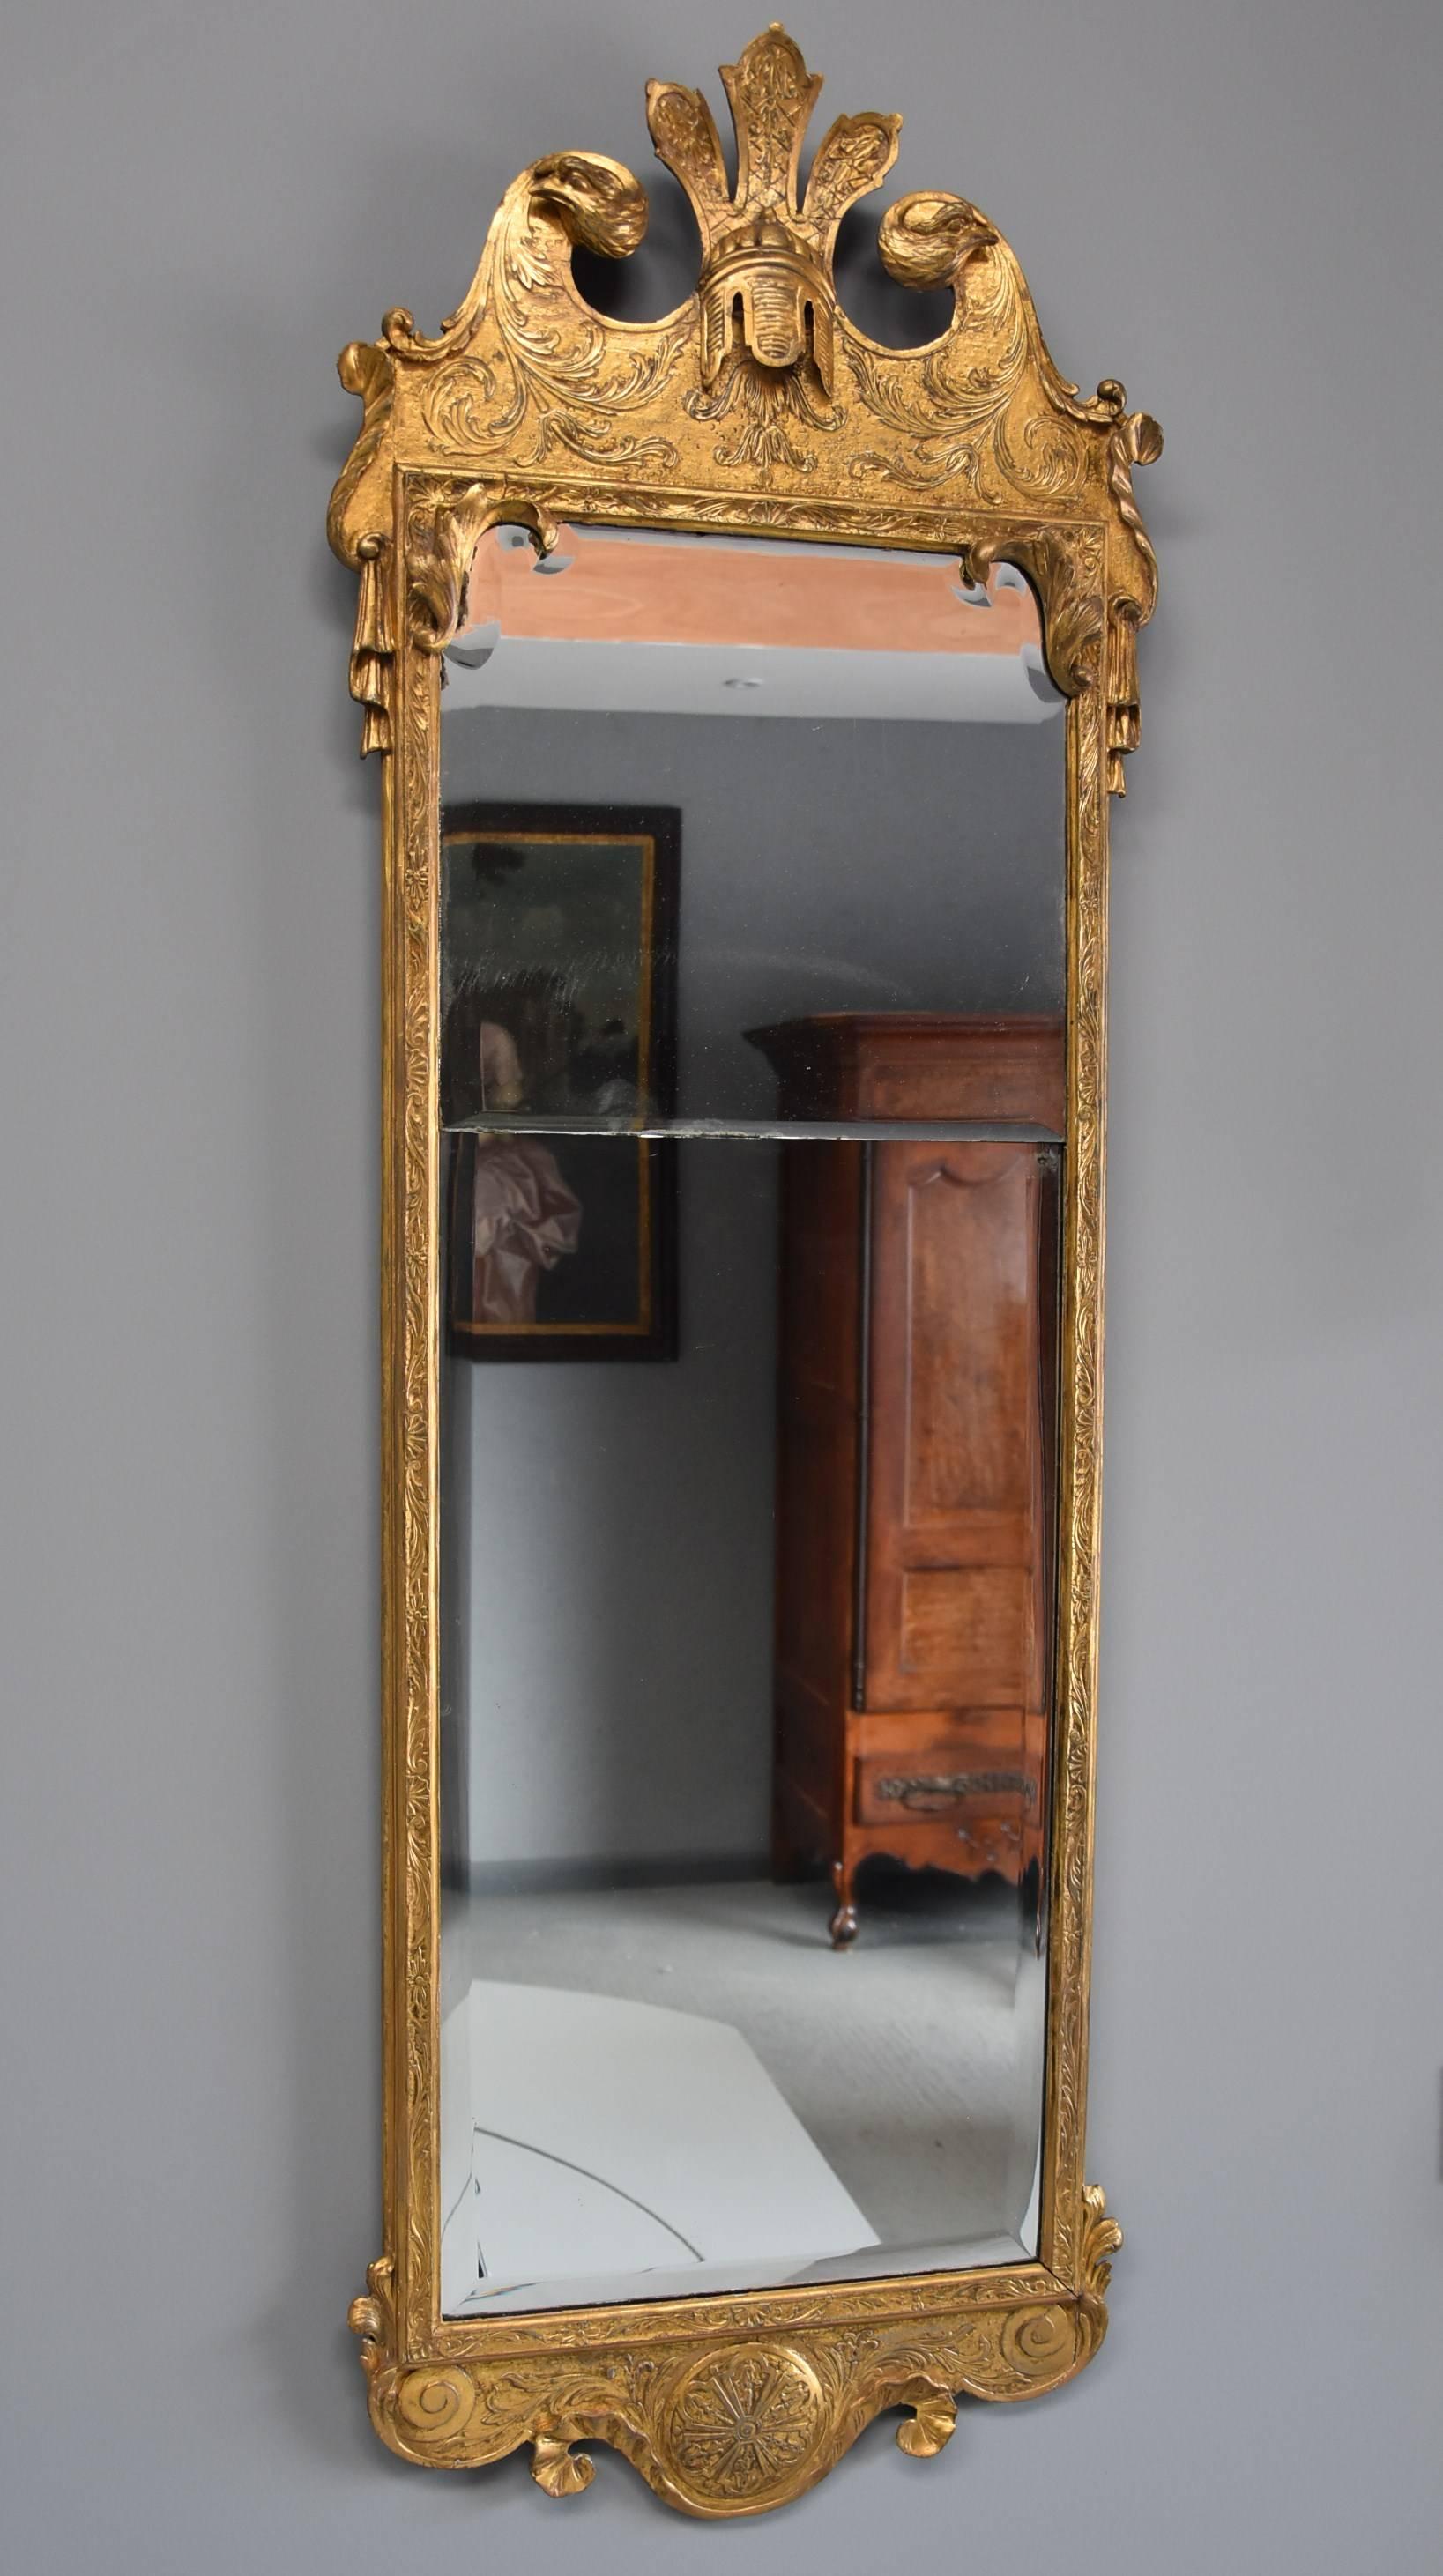 A large early 18th century rare George I giltwood and gesso pier mirror retaining both original gilding and plate, in the manner of John Belchier.

The carved wood and gesso mirror frame retains the original gilding and consists of a broken scroll